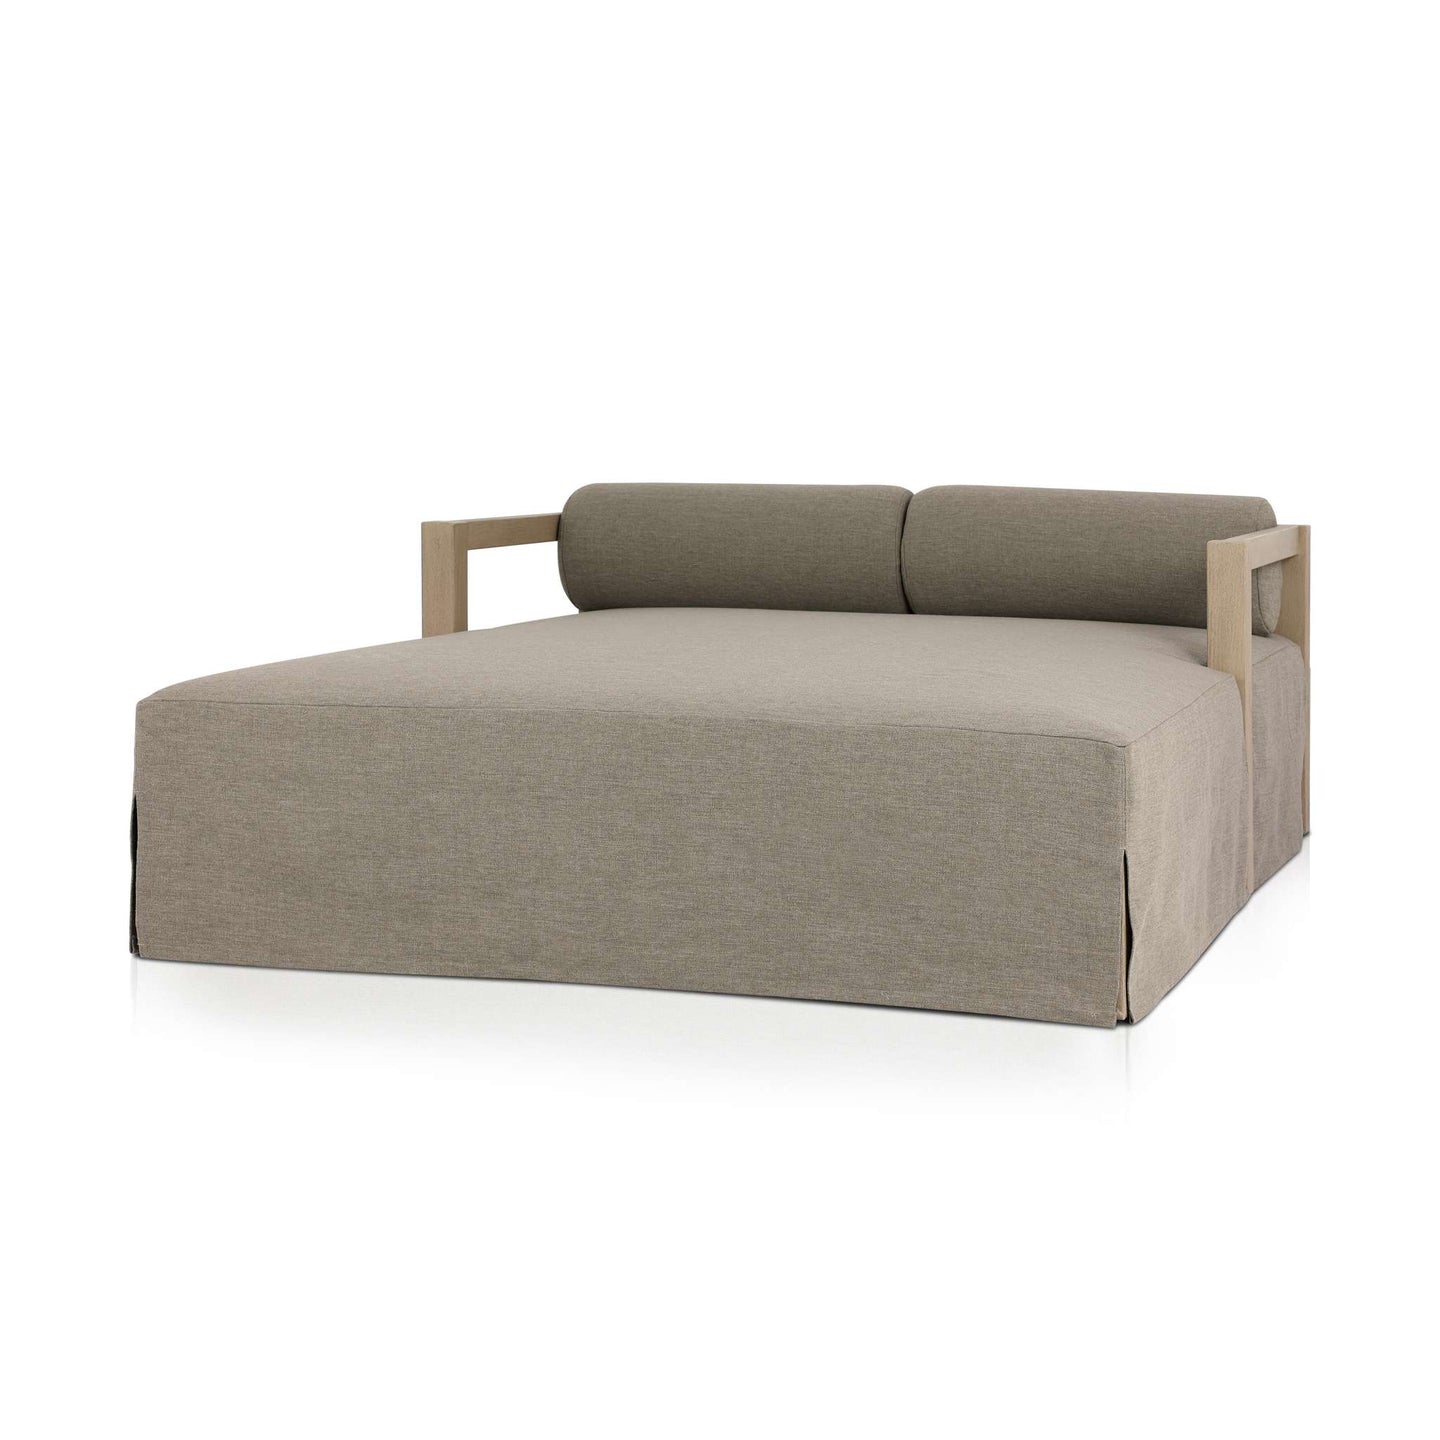 Laskin Outdoor Daybed